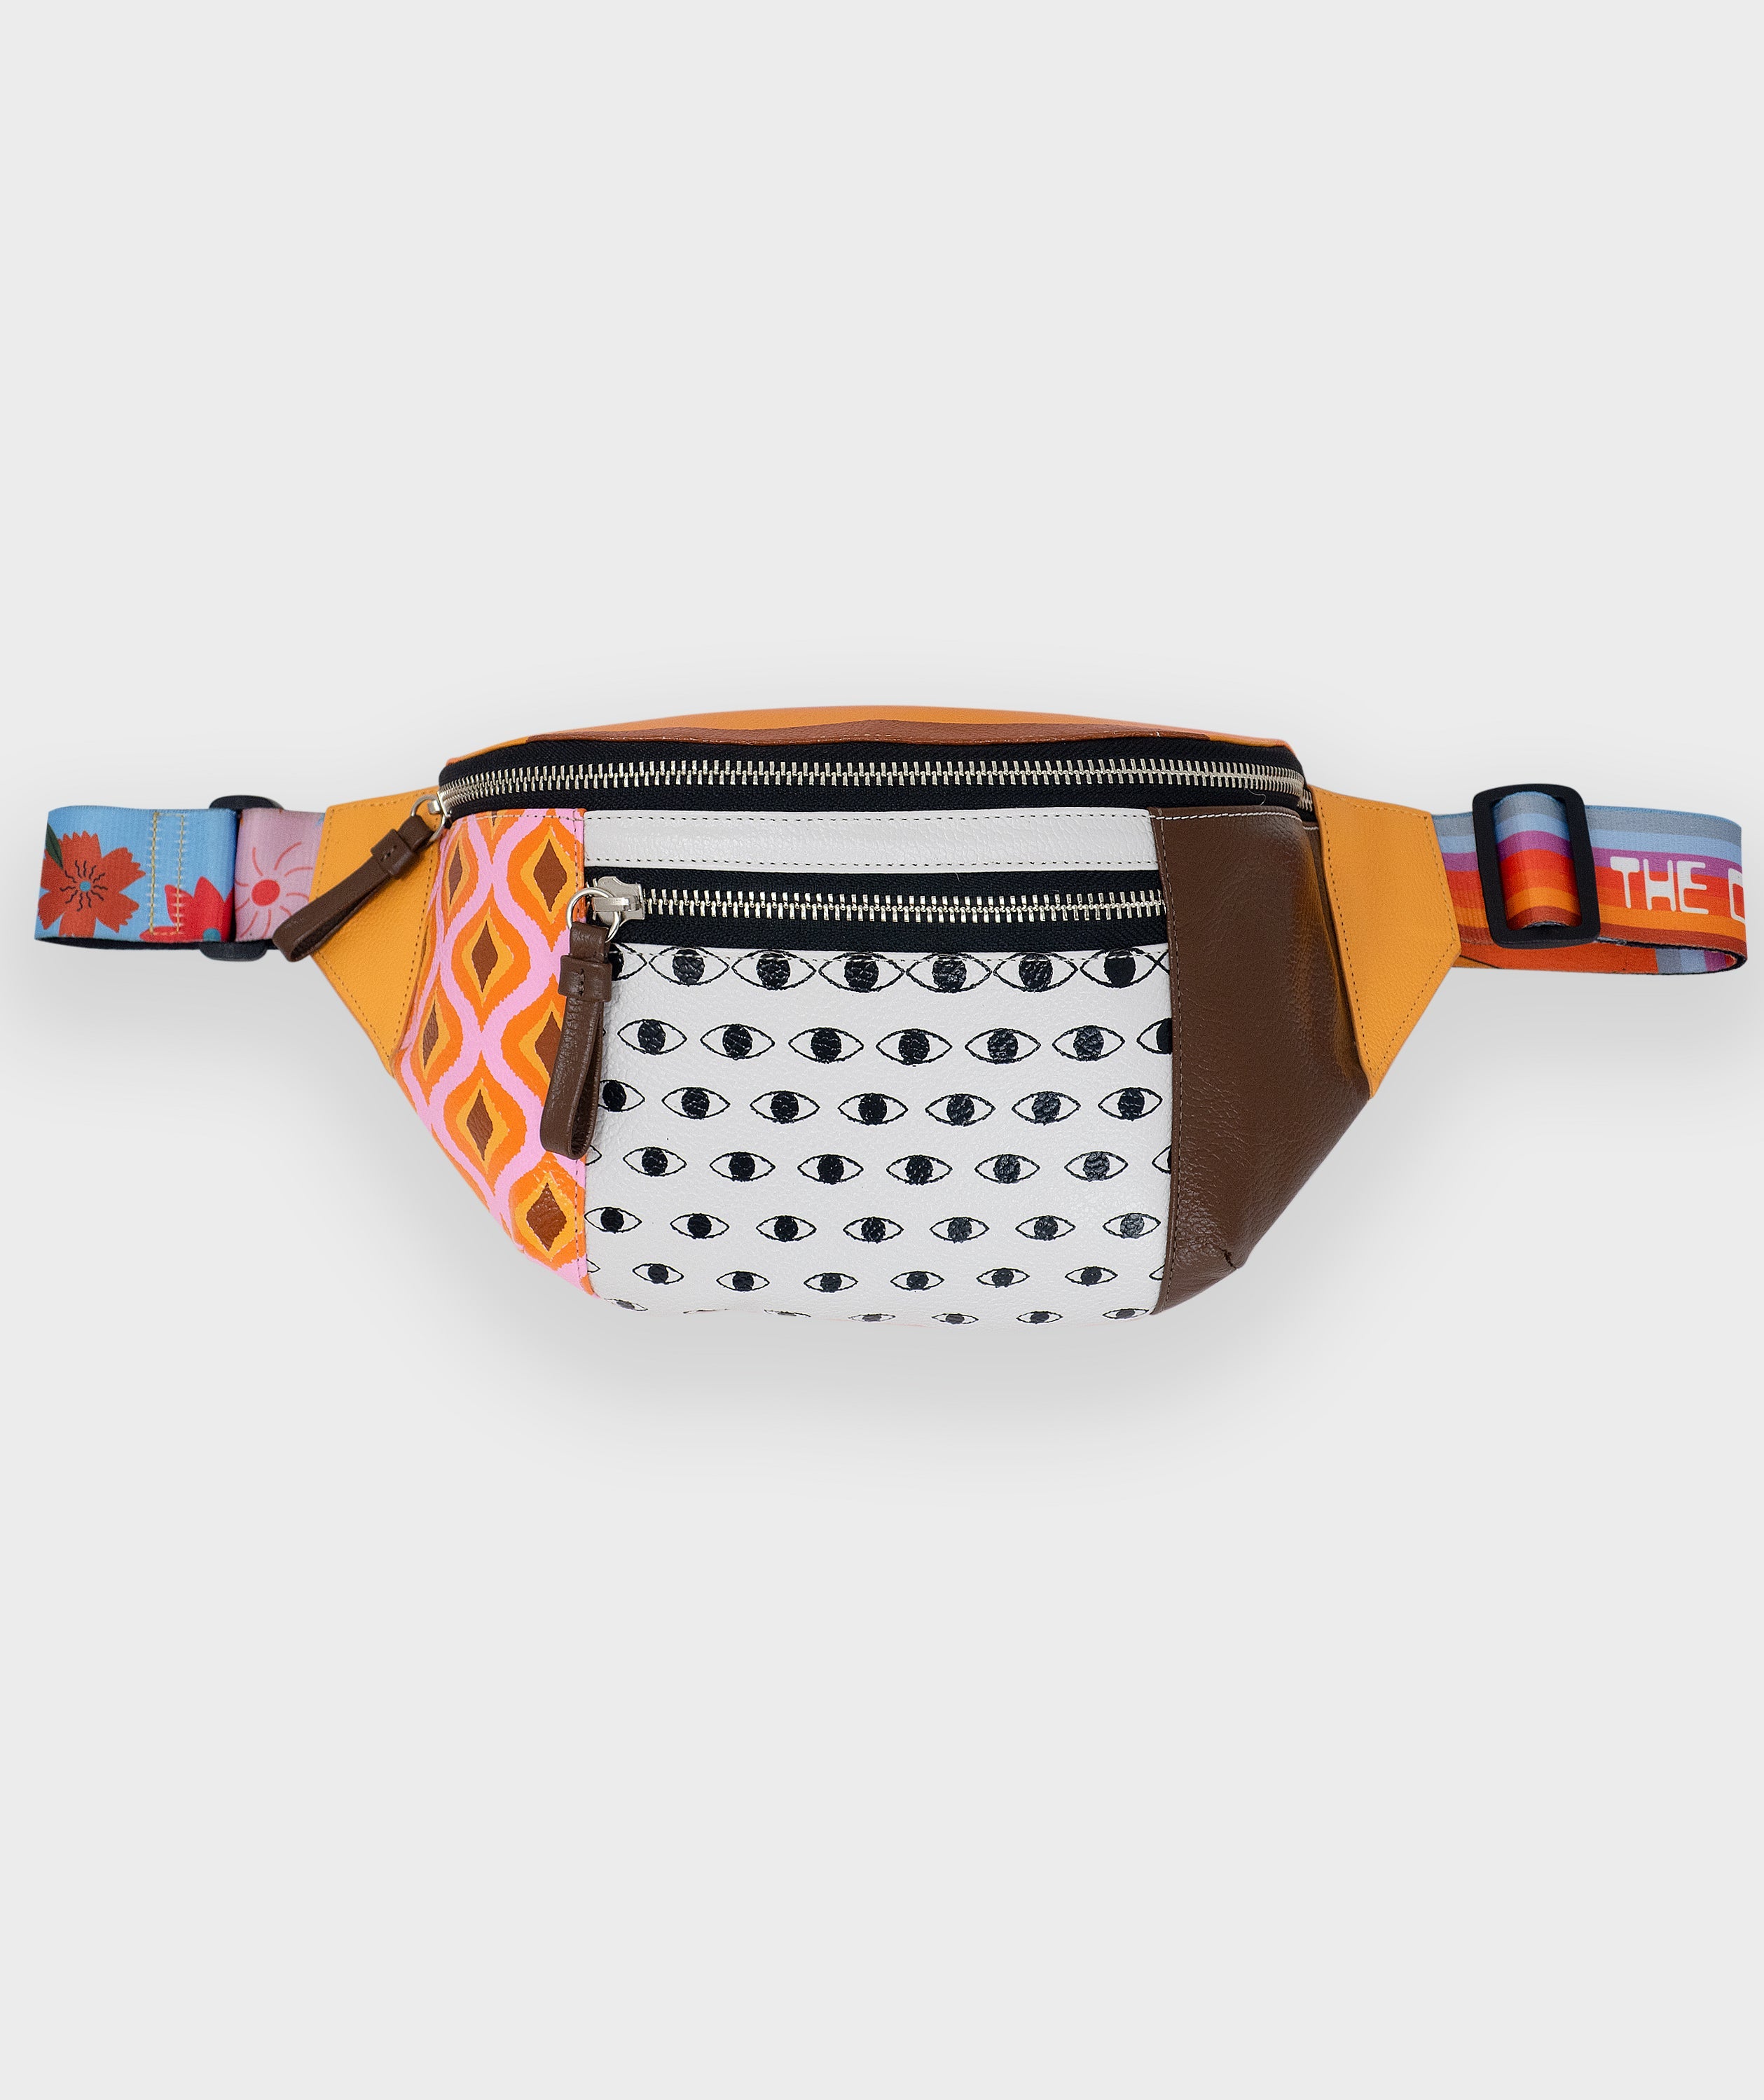 Harold Fanny Pack - Cosmic Journey Print - Front view